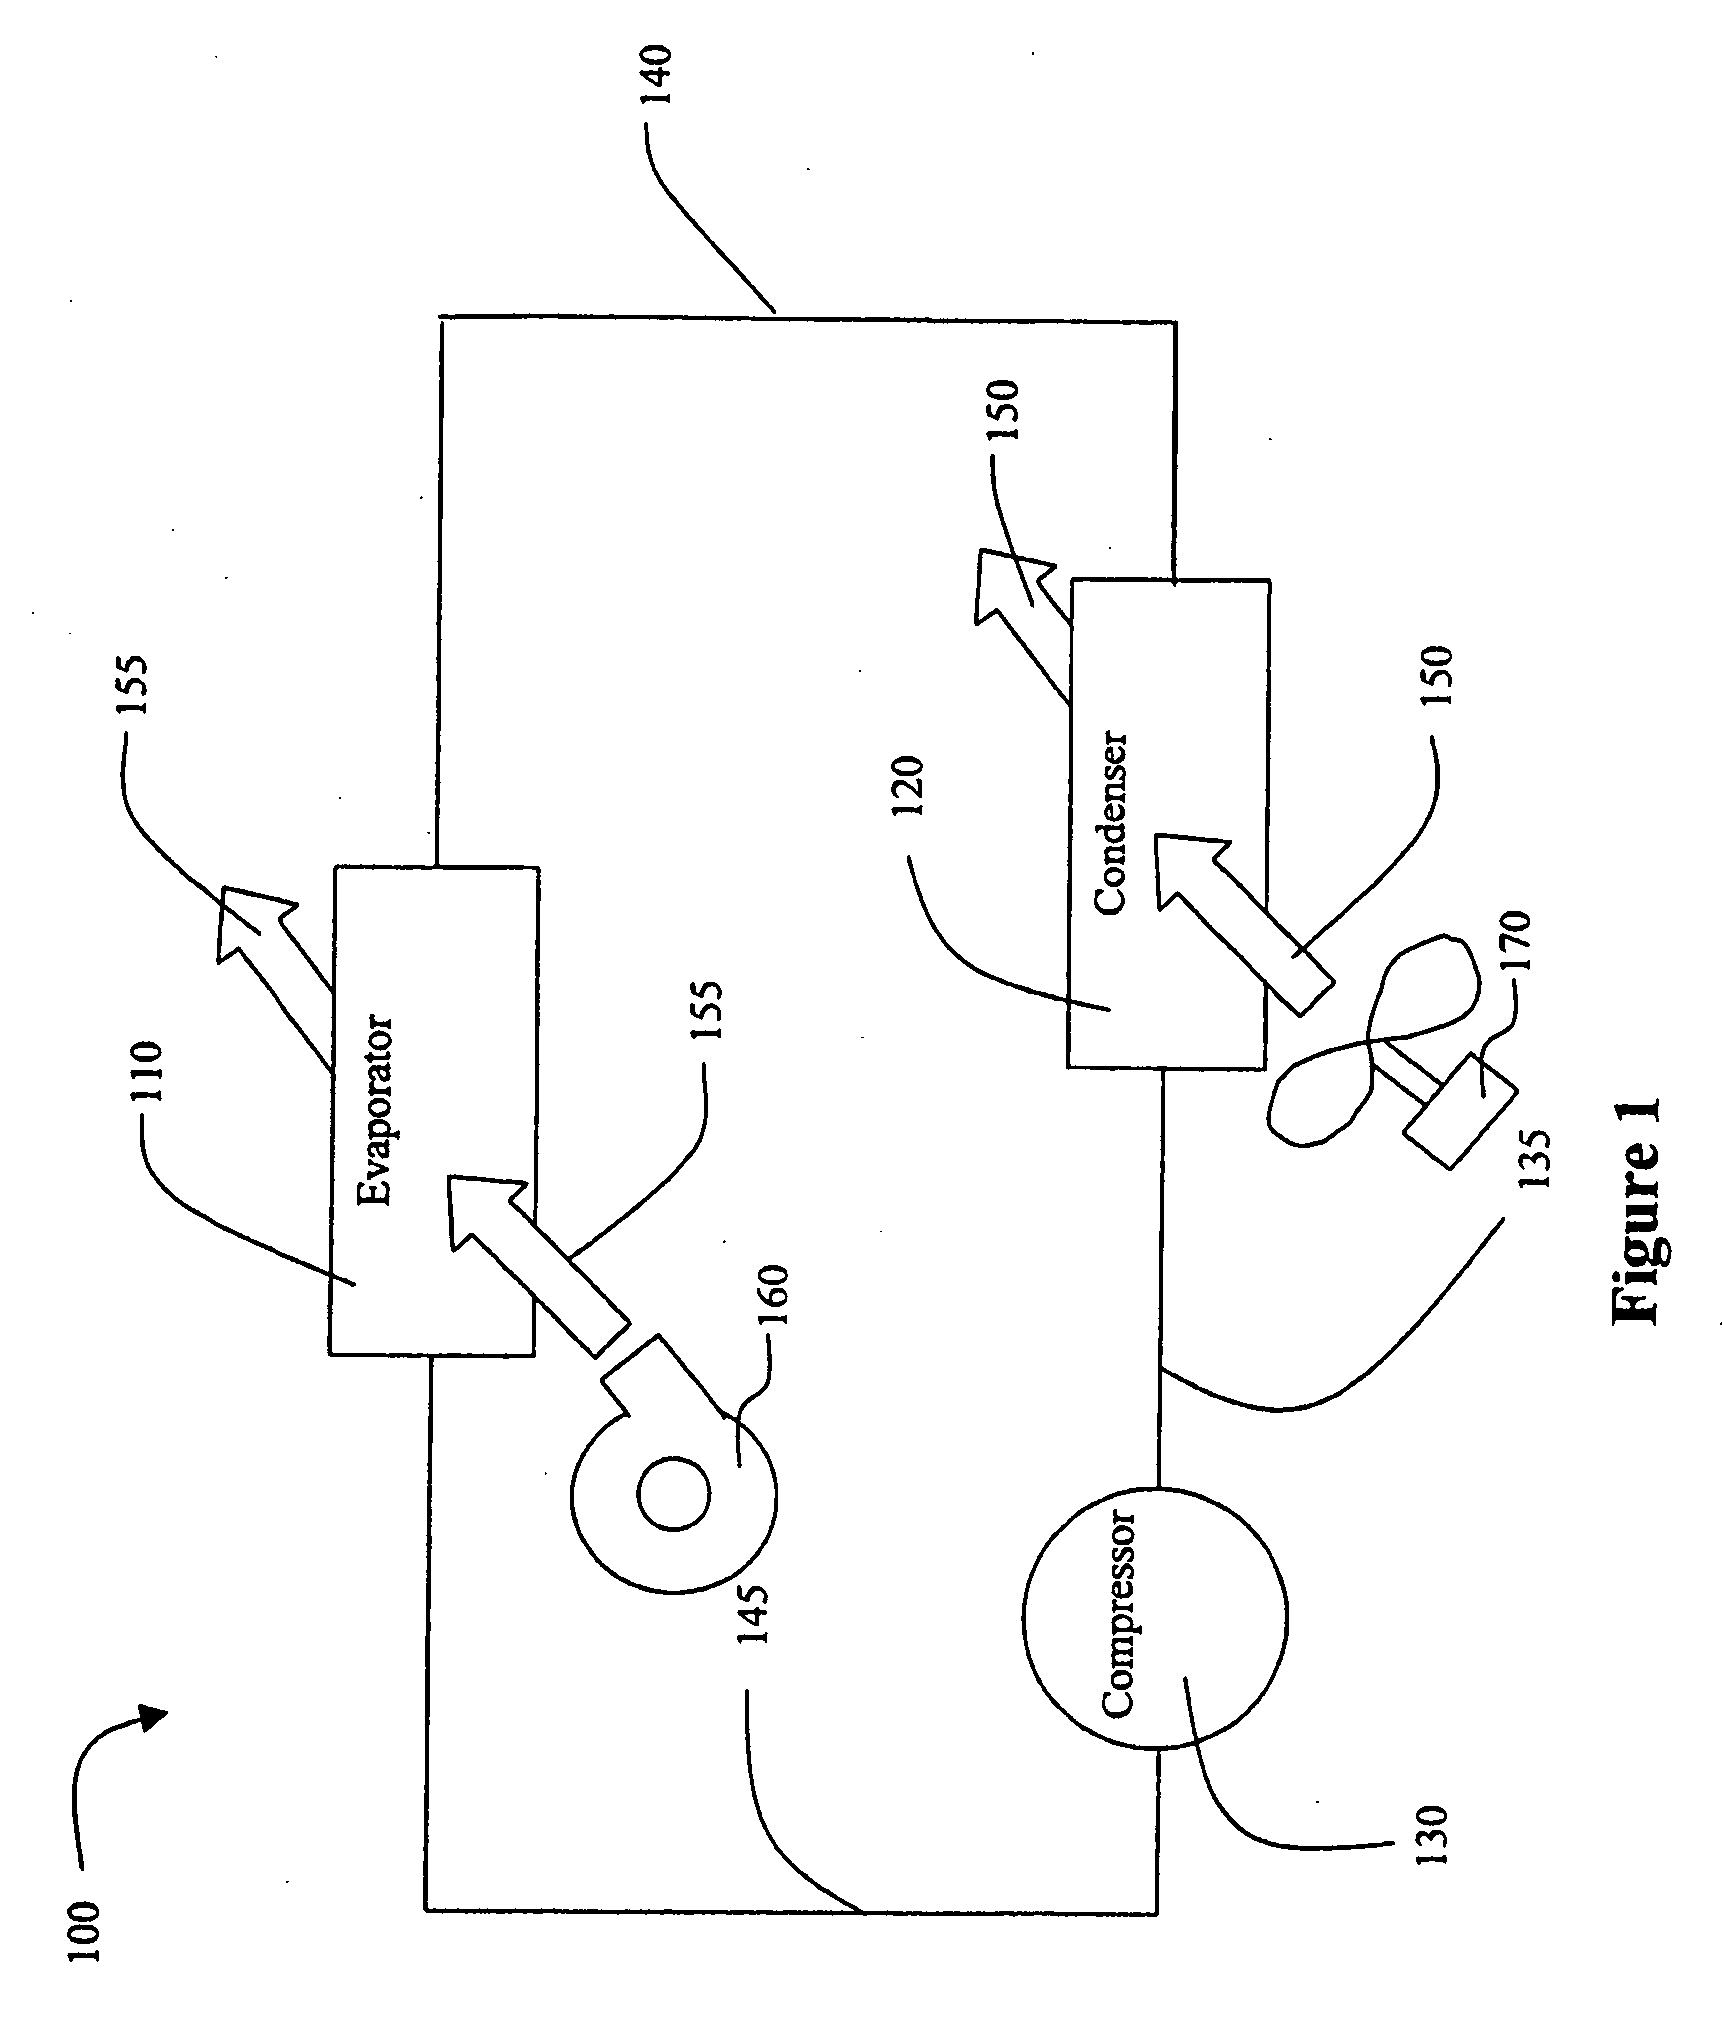 Method and system for dehumidification and refrigerant pressure control